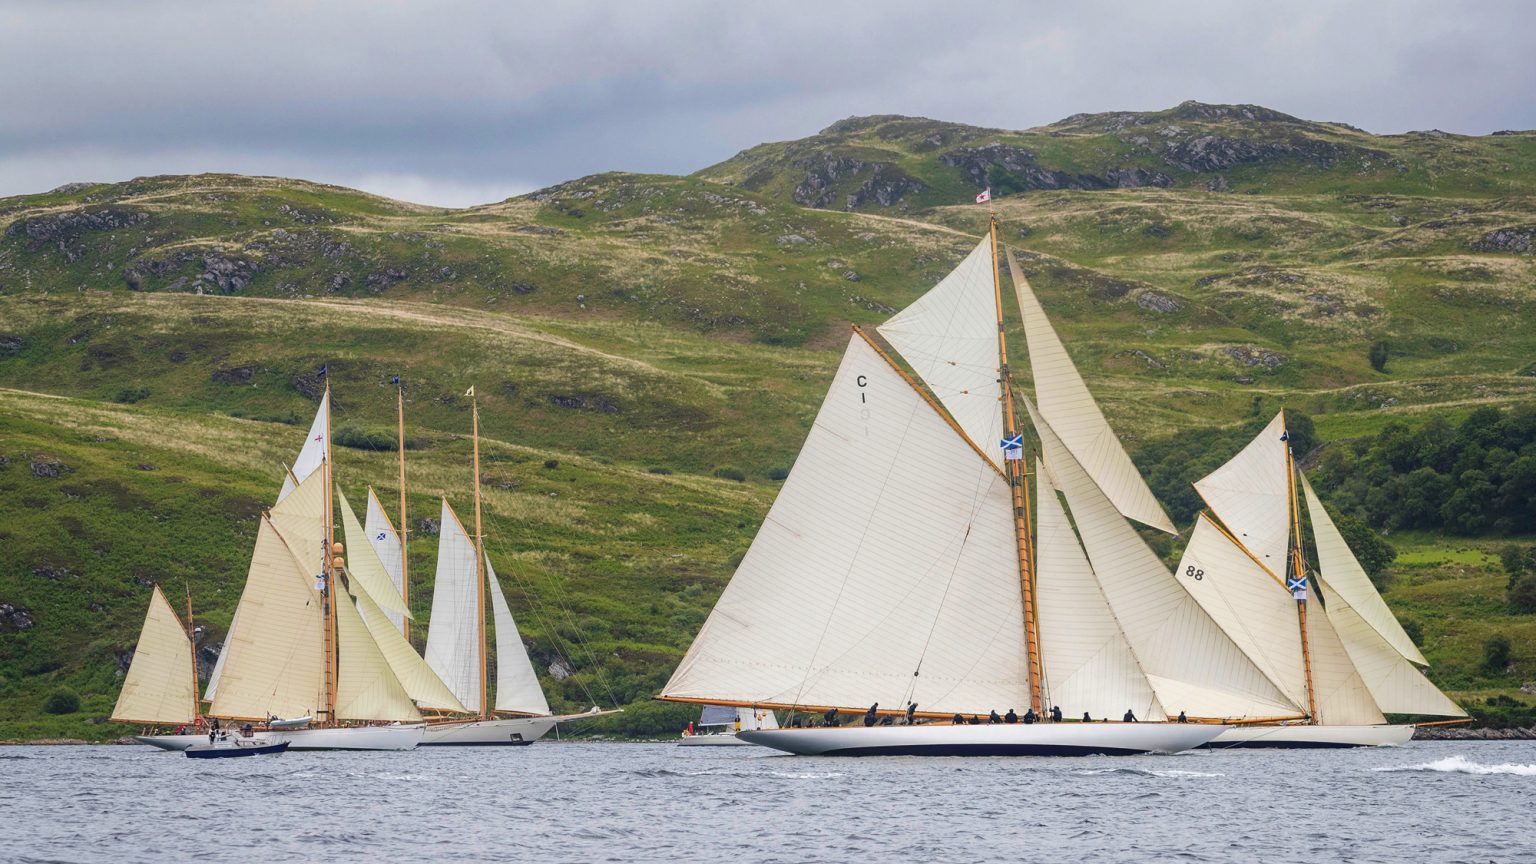 Flight of the Dragons: a pilgrimage aboard a stunning classic yacht